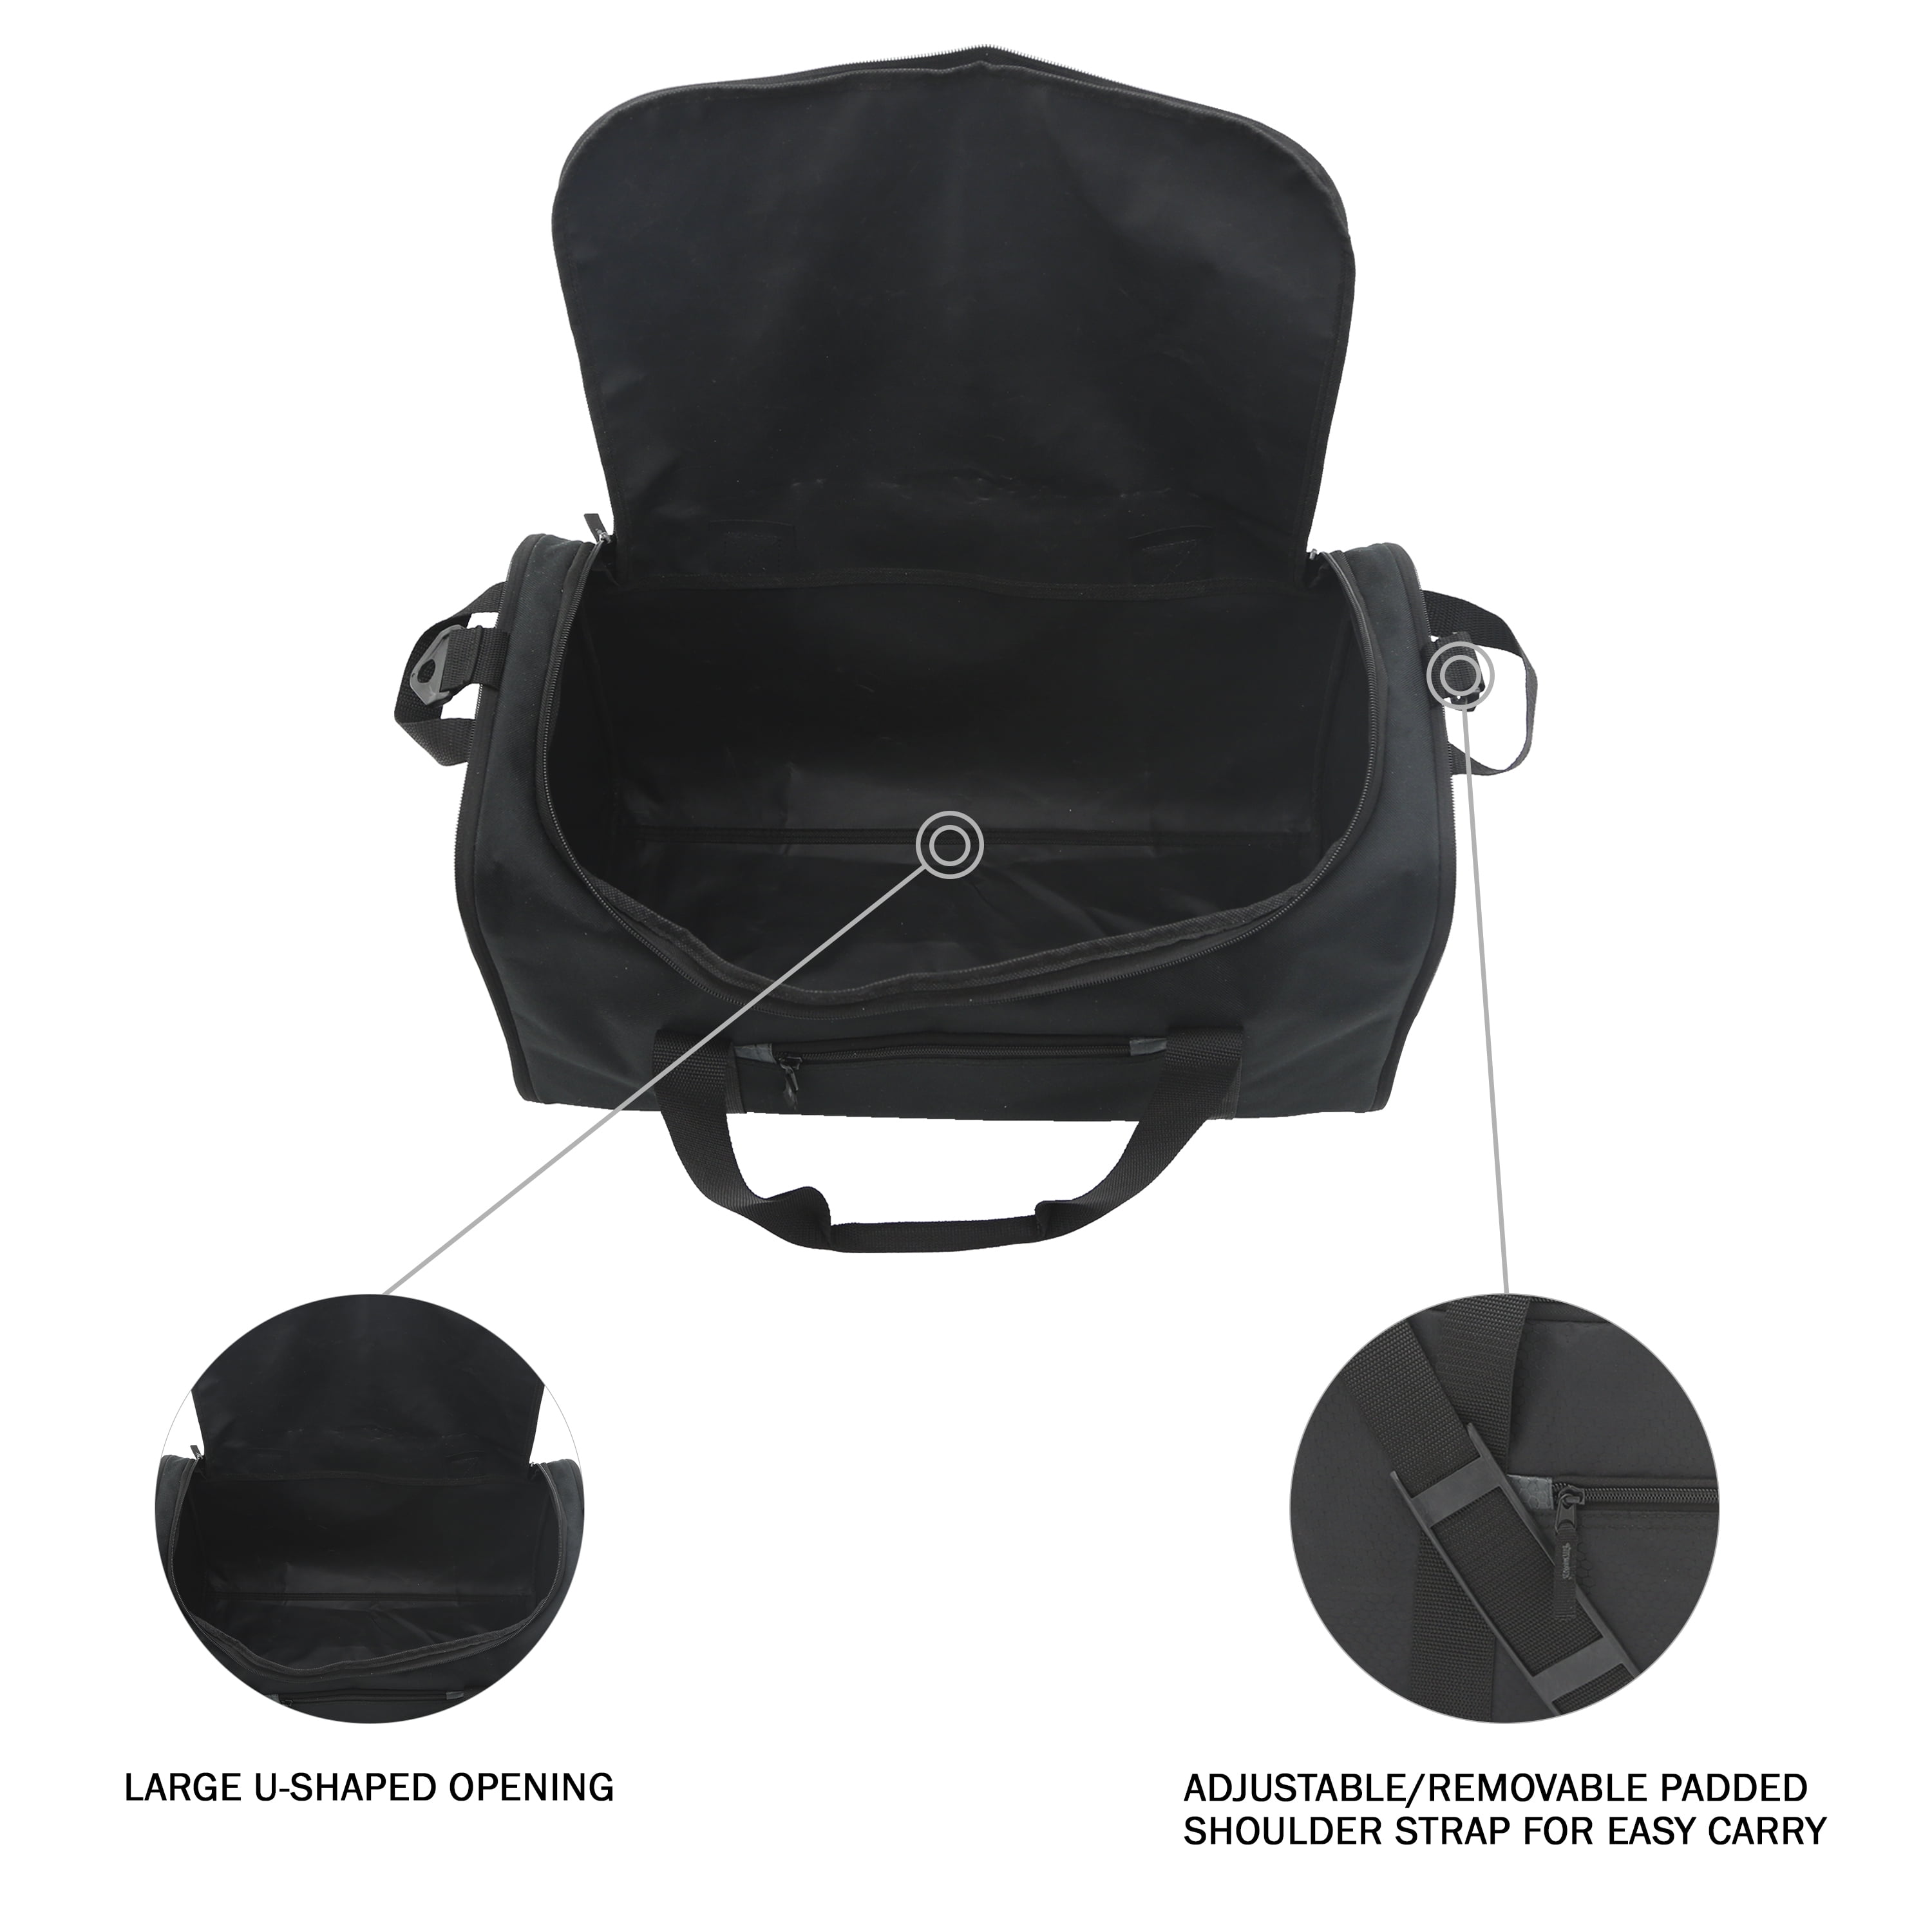 Utility Duffel – Outdoor Products